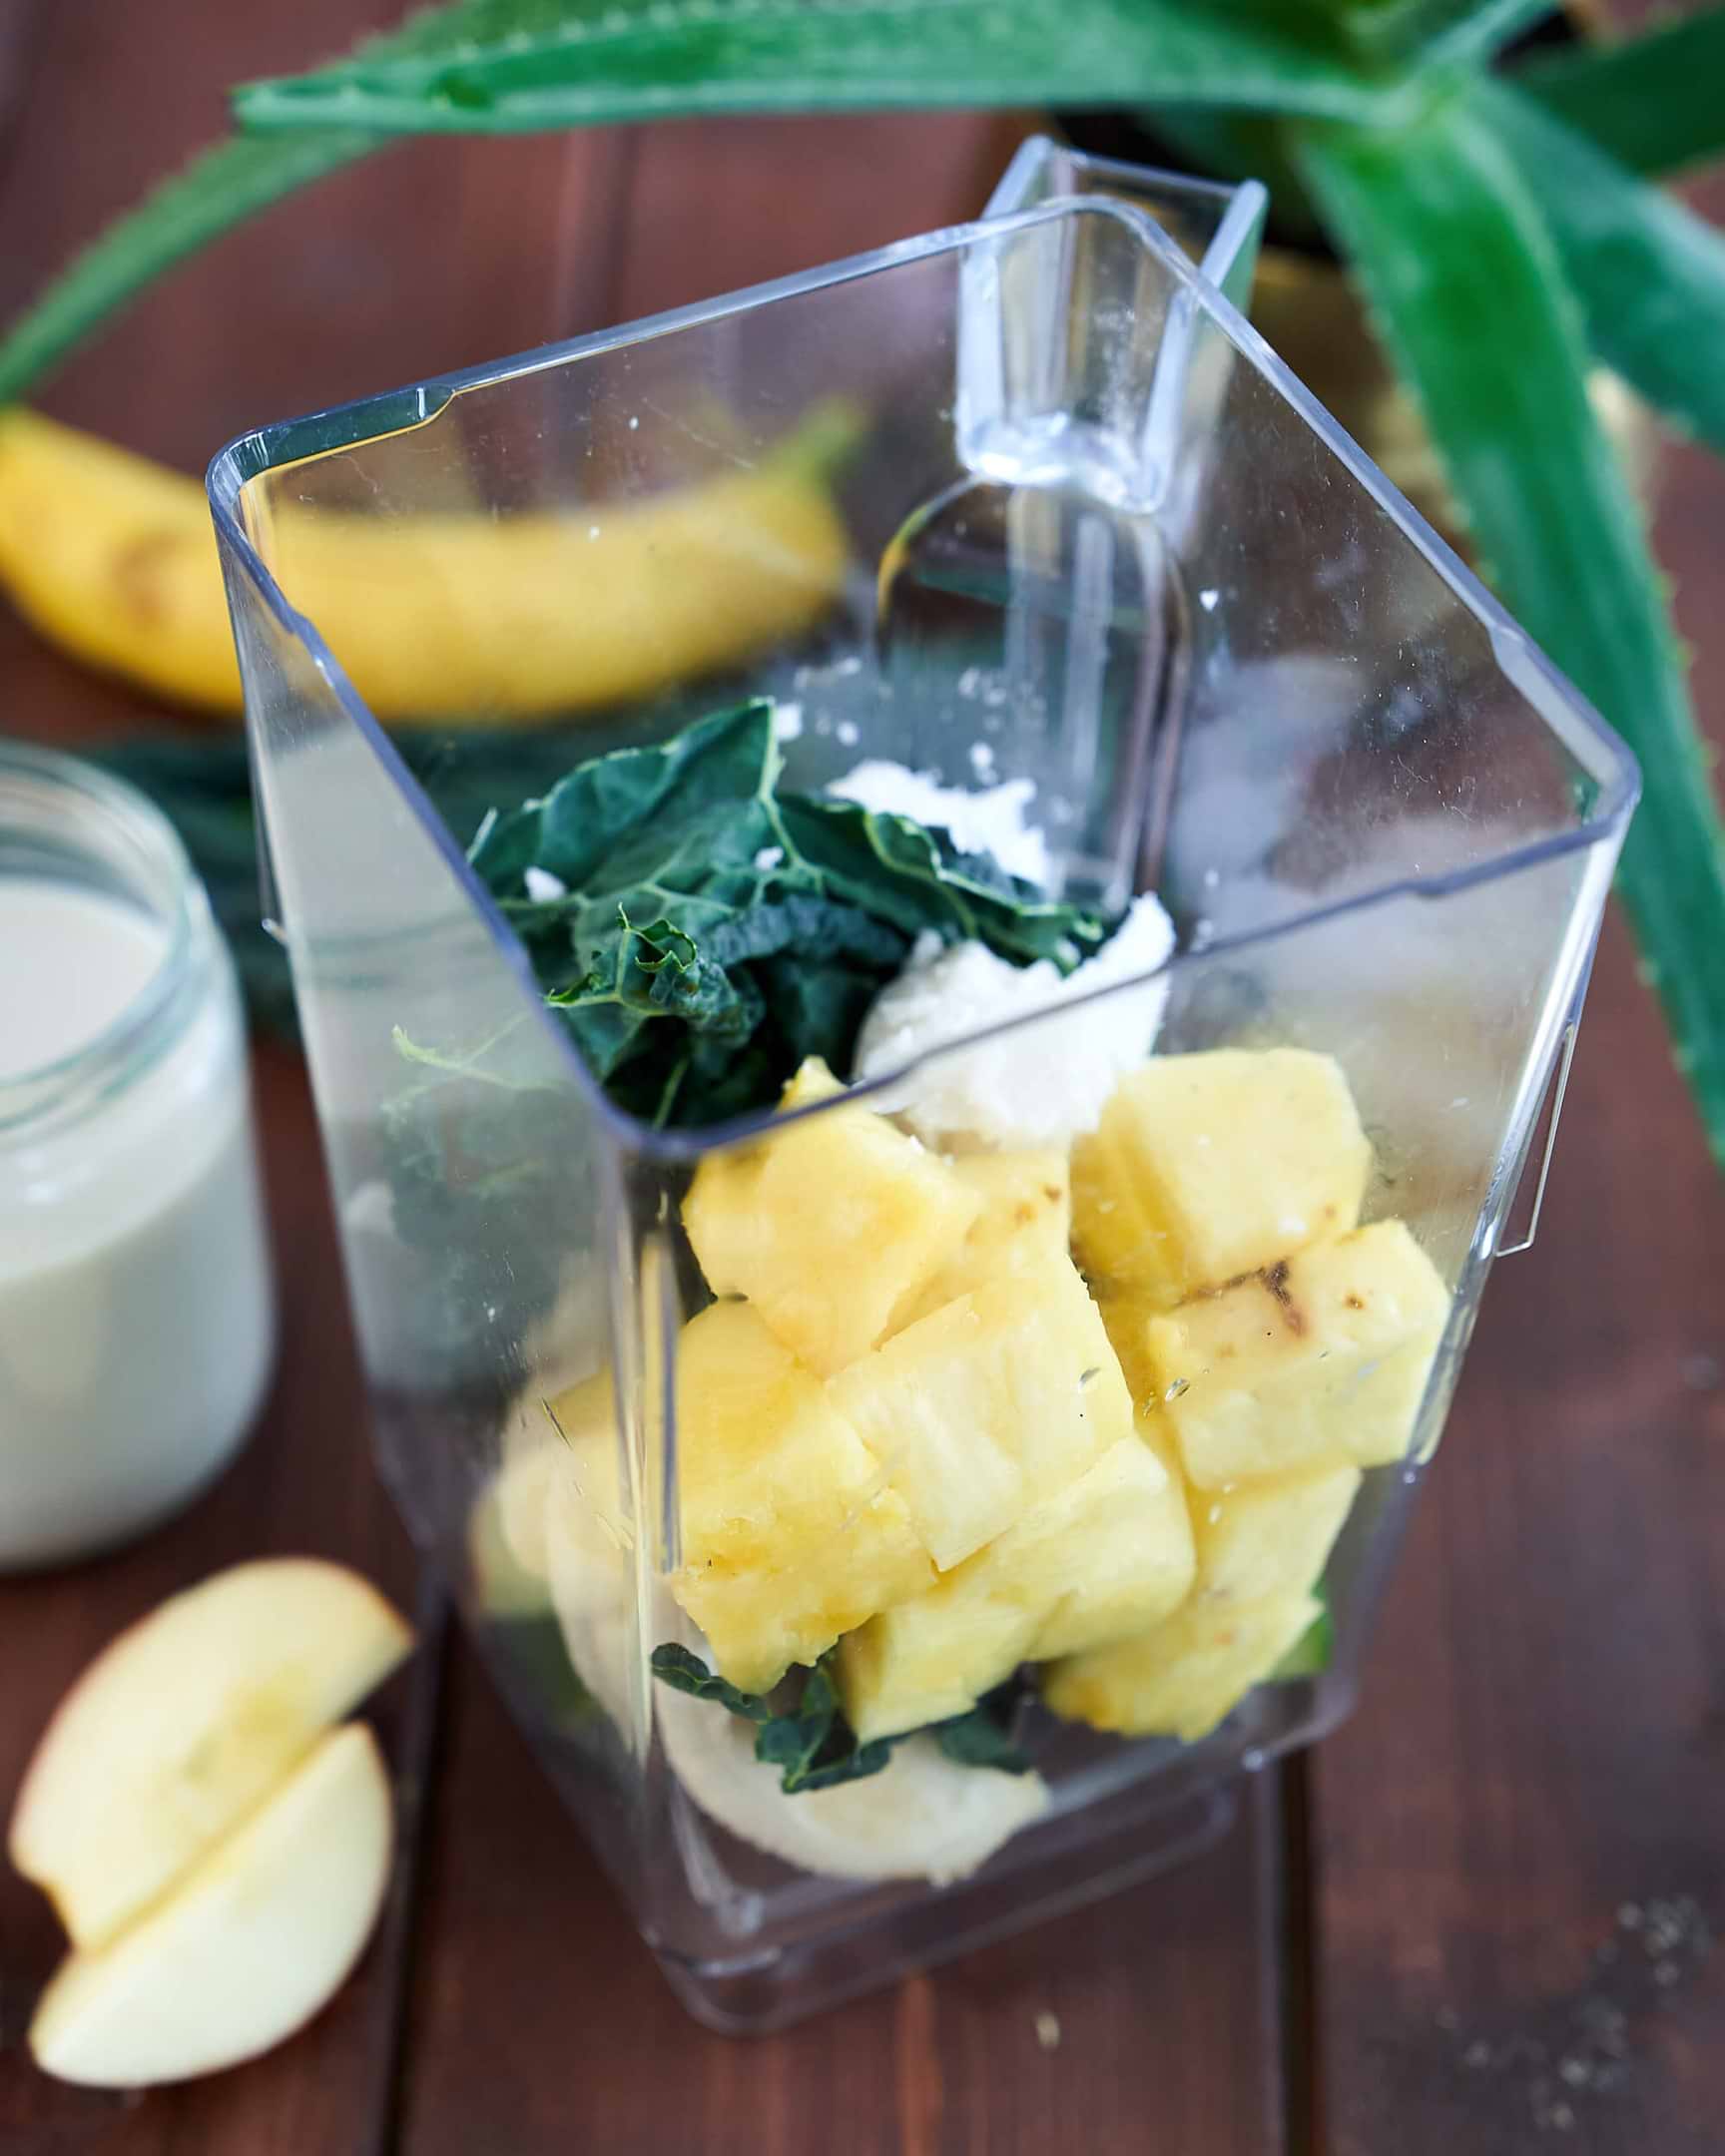 Green Aloe Smoothie with Kale, Pineapple and Banana in Blender